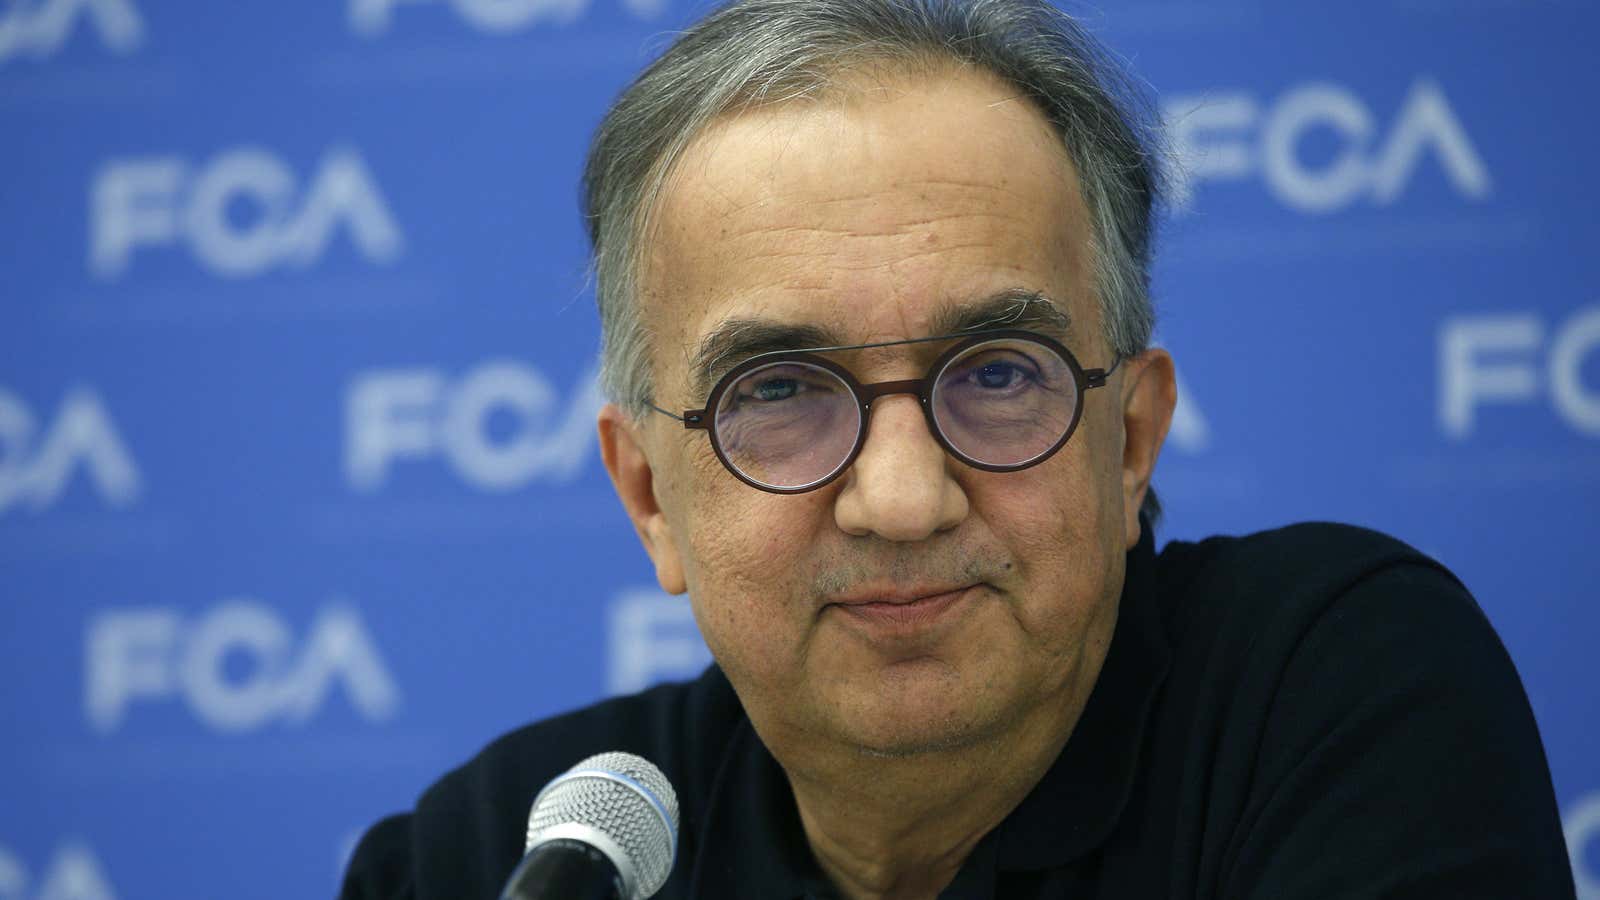 Marchionne in January.